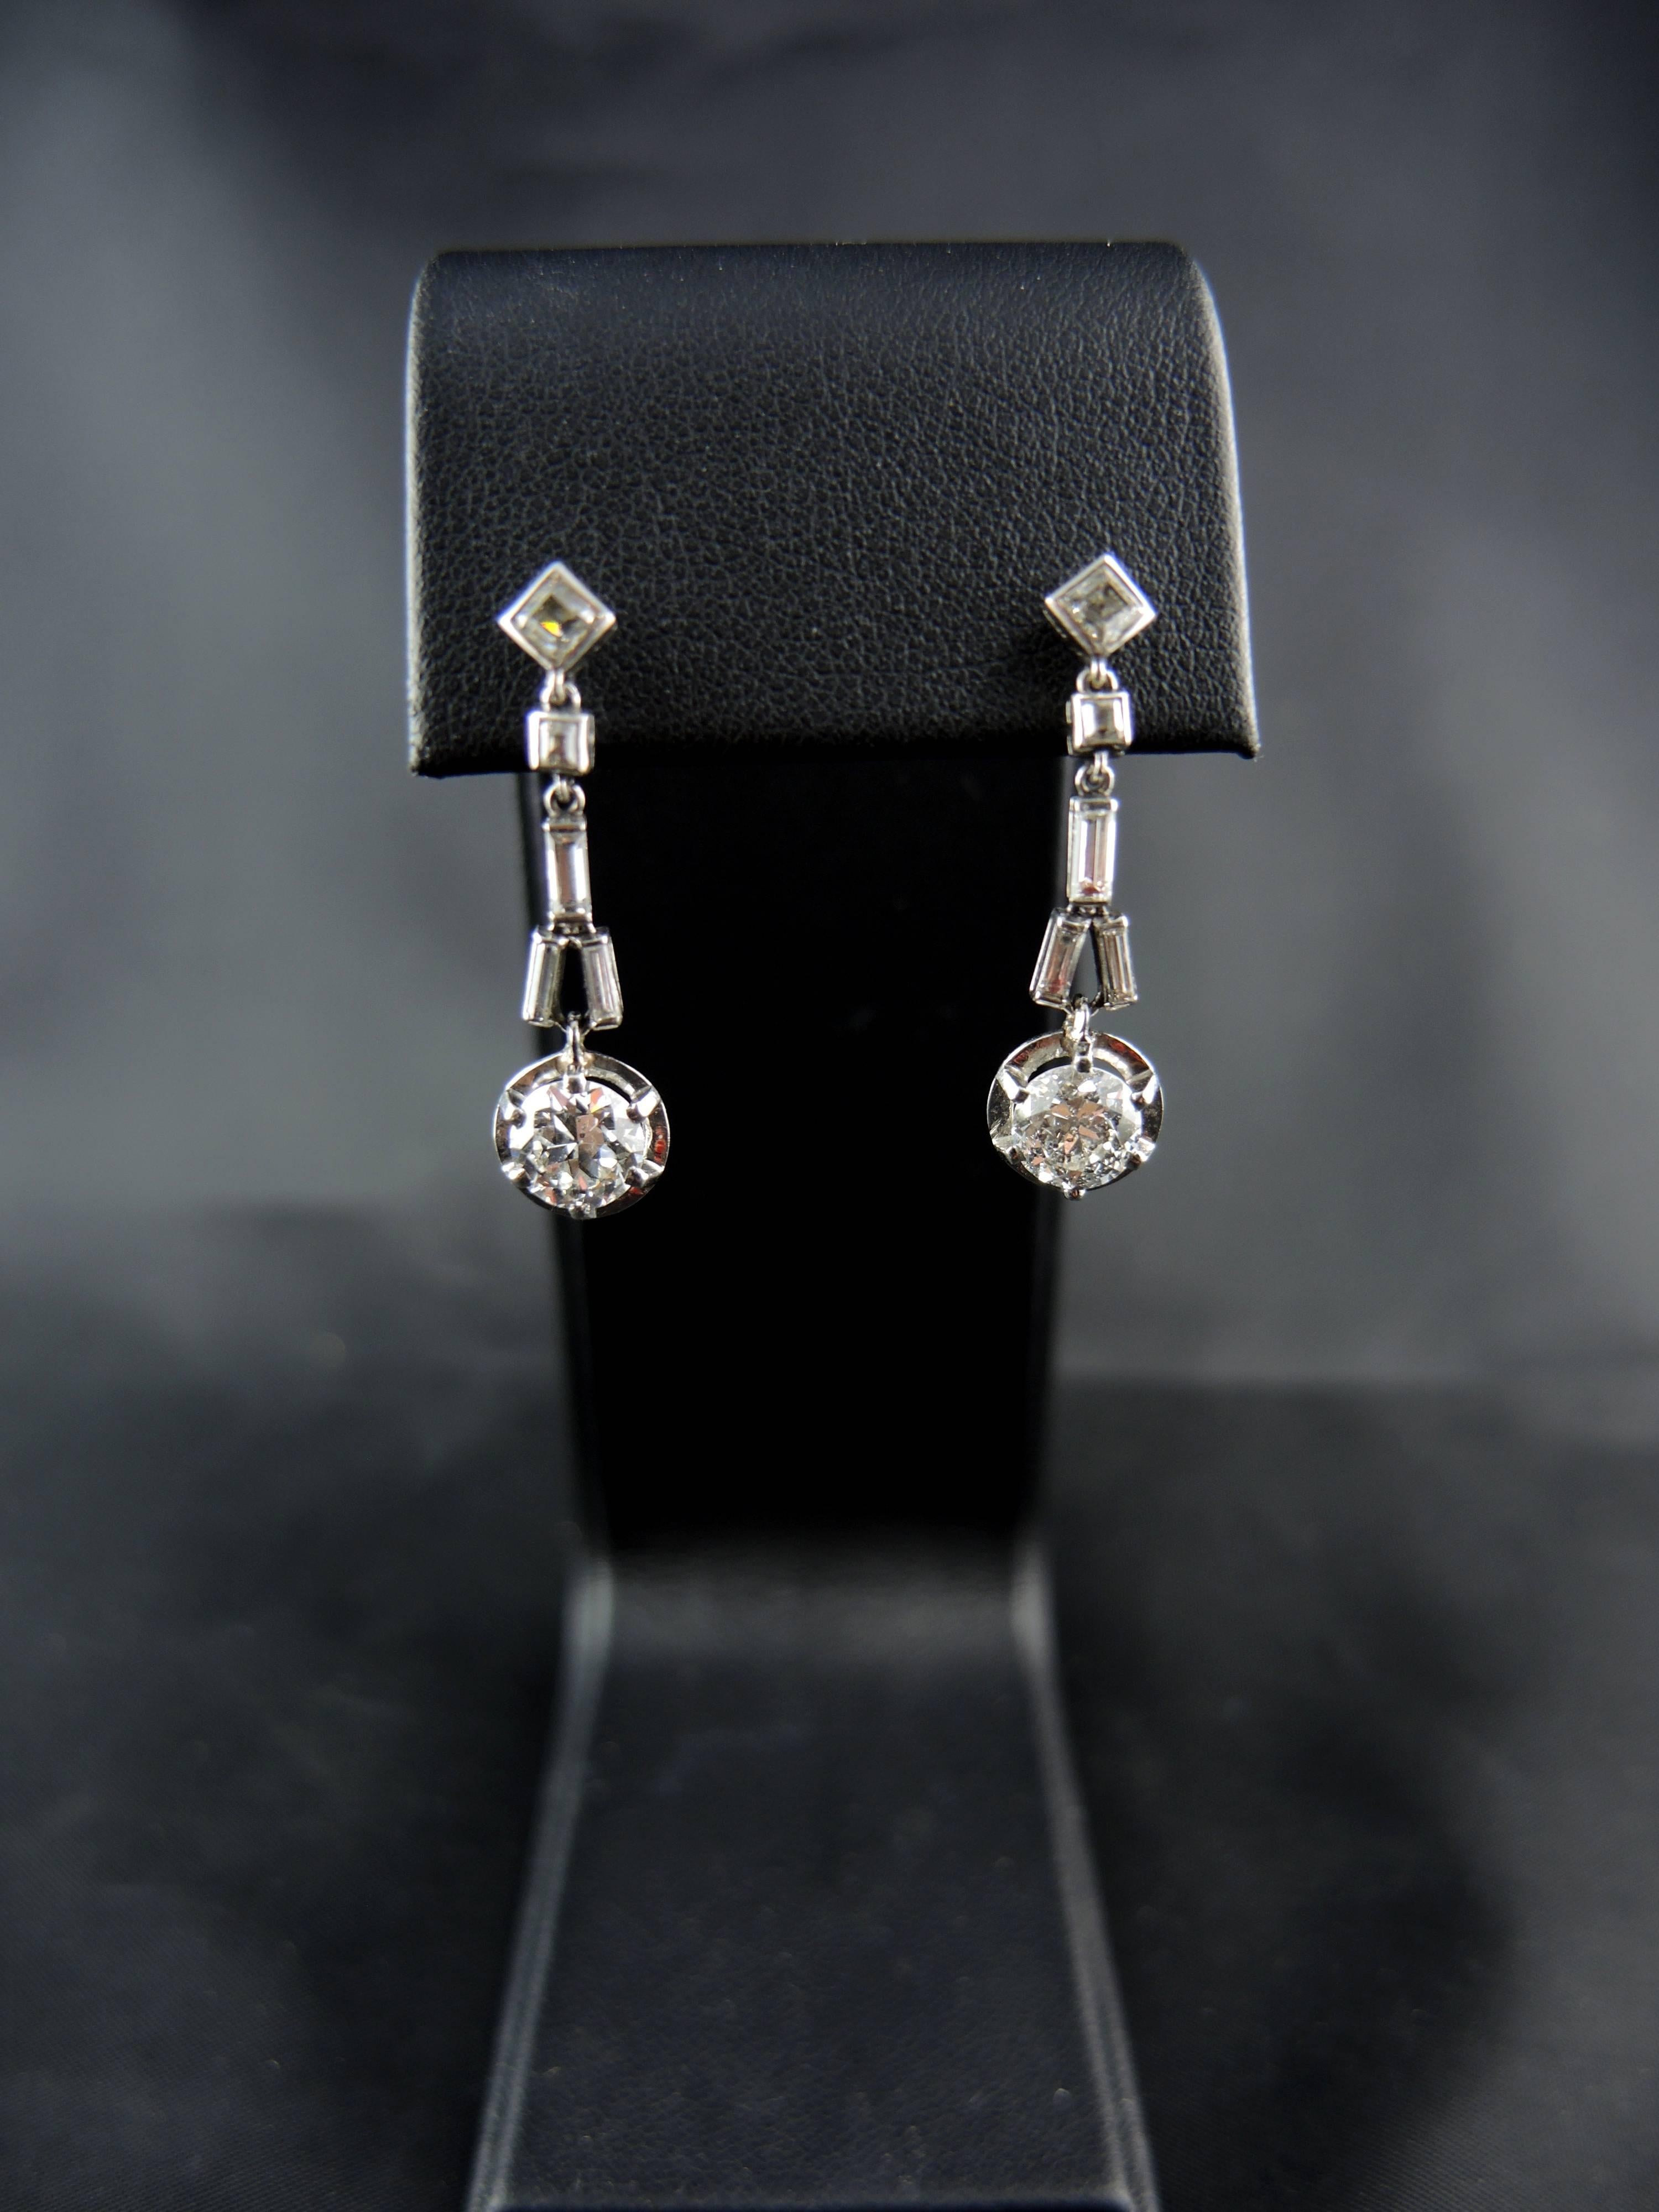 Platinium Art Deco earrings (quality mark: dog) set with baguette and square cut diamonds (total weight apx 0.75 Ct), and old cut diamonds (total weight apx 1.50 Cts).

French work, circa 1930, Art Deco.

Weight: 4,50 g
Height: 3,00 cm

State : very